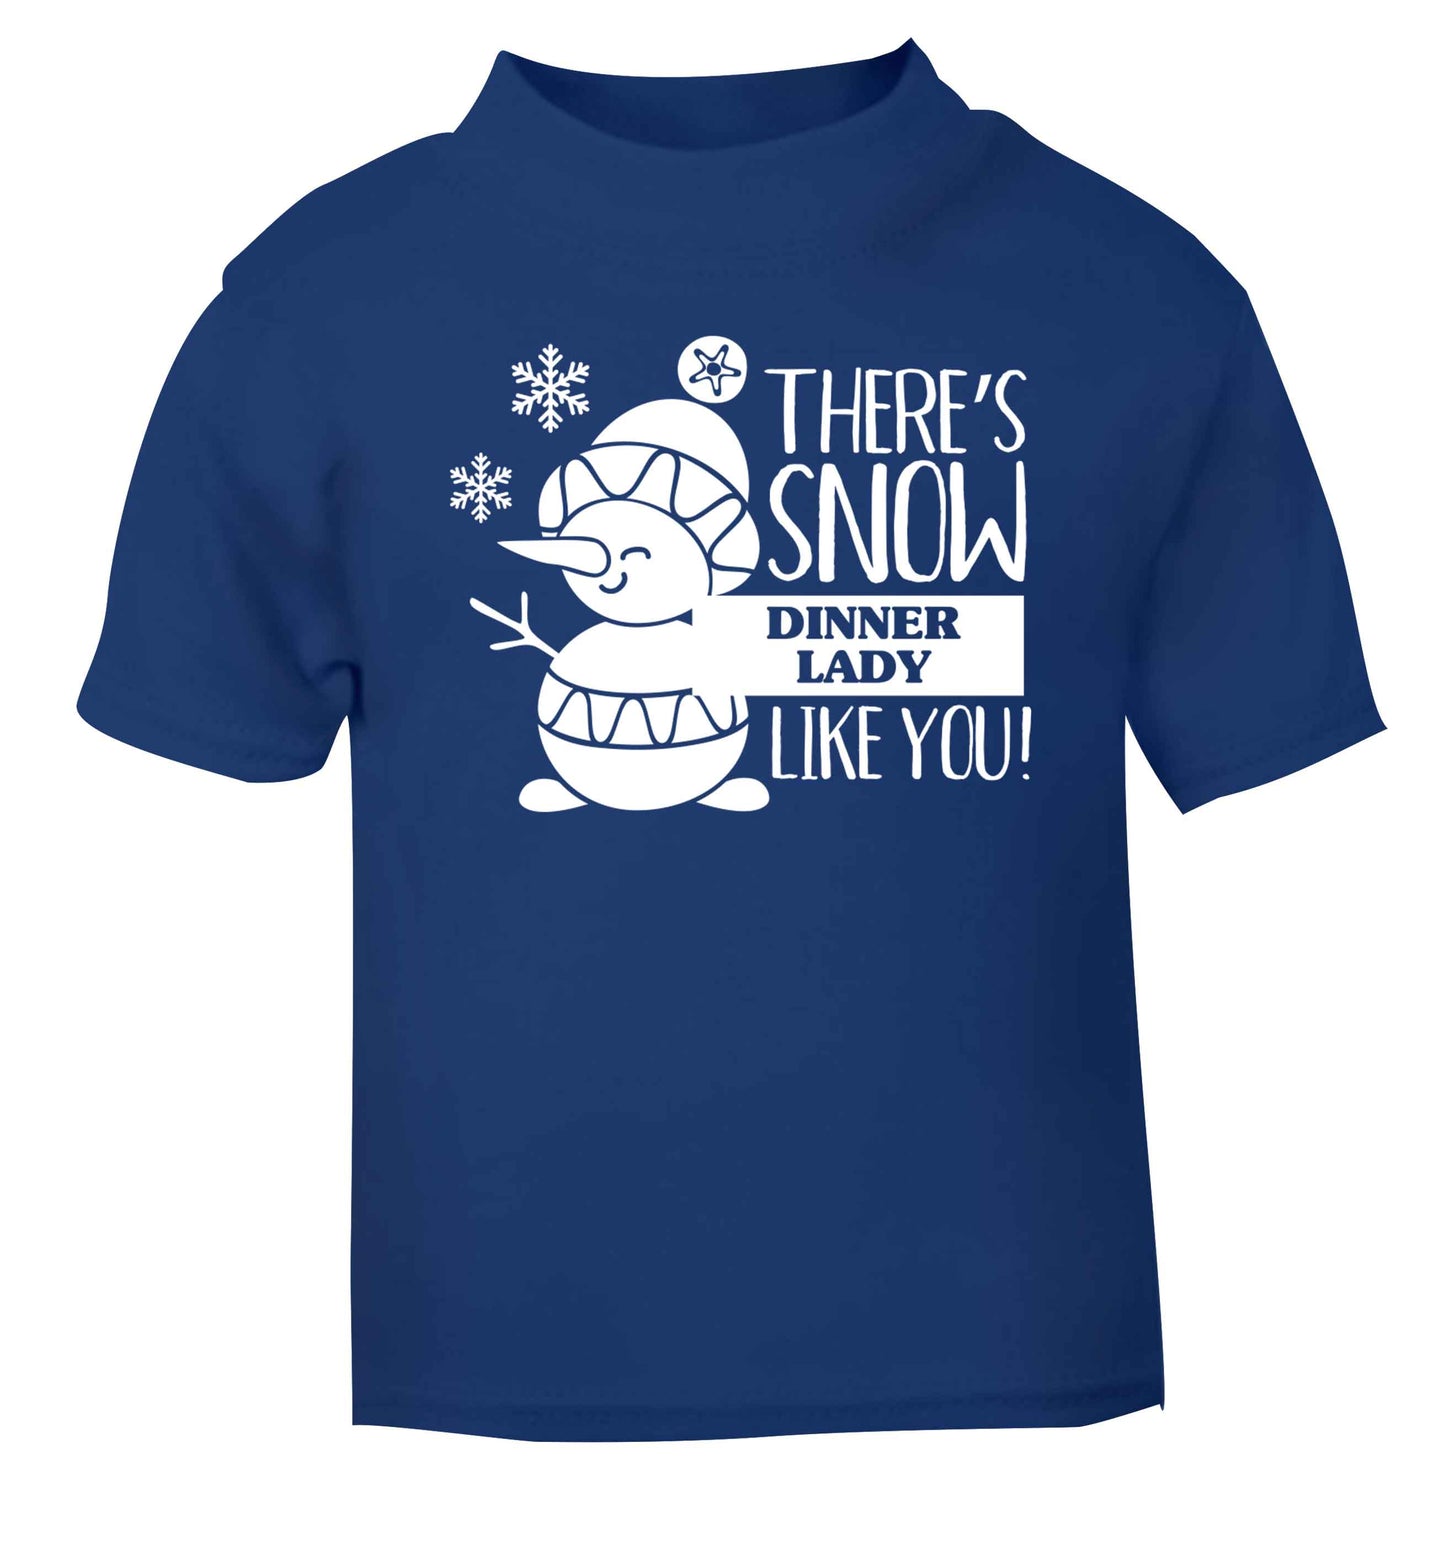 There's snow dinner lady like you blue baby toddler Tshirt 2 Years